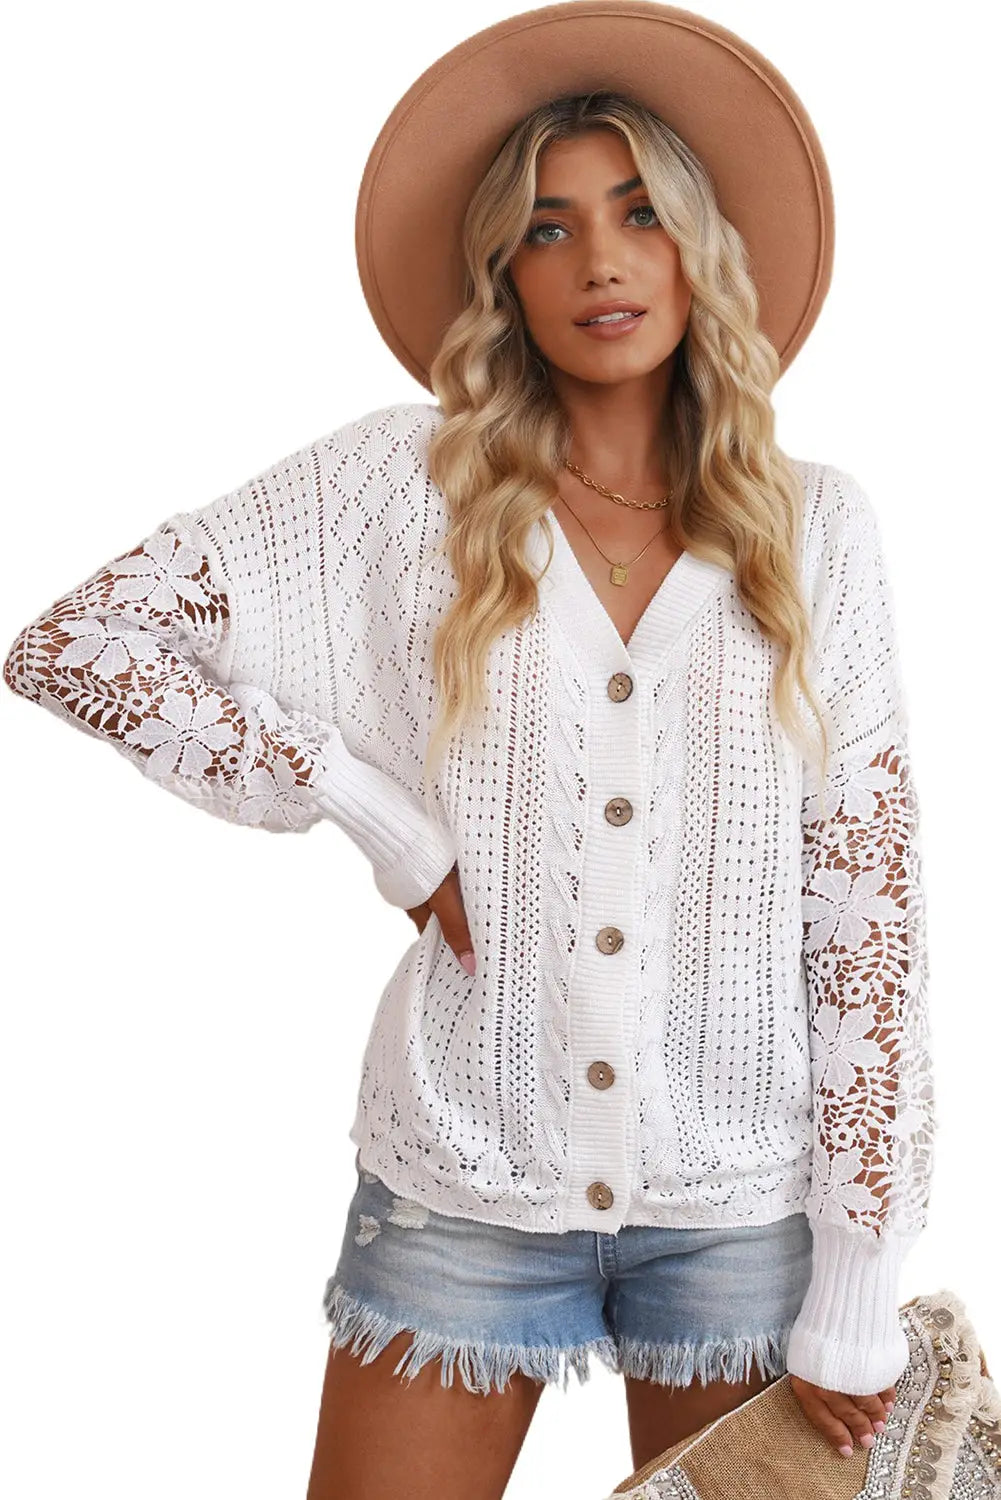 White lace crochet hollow out knit buttoned sweater - sweaters & cardigans